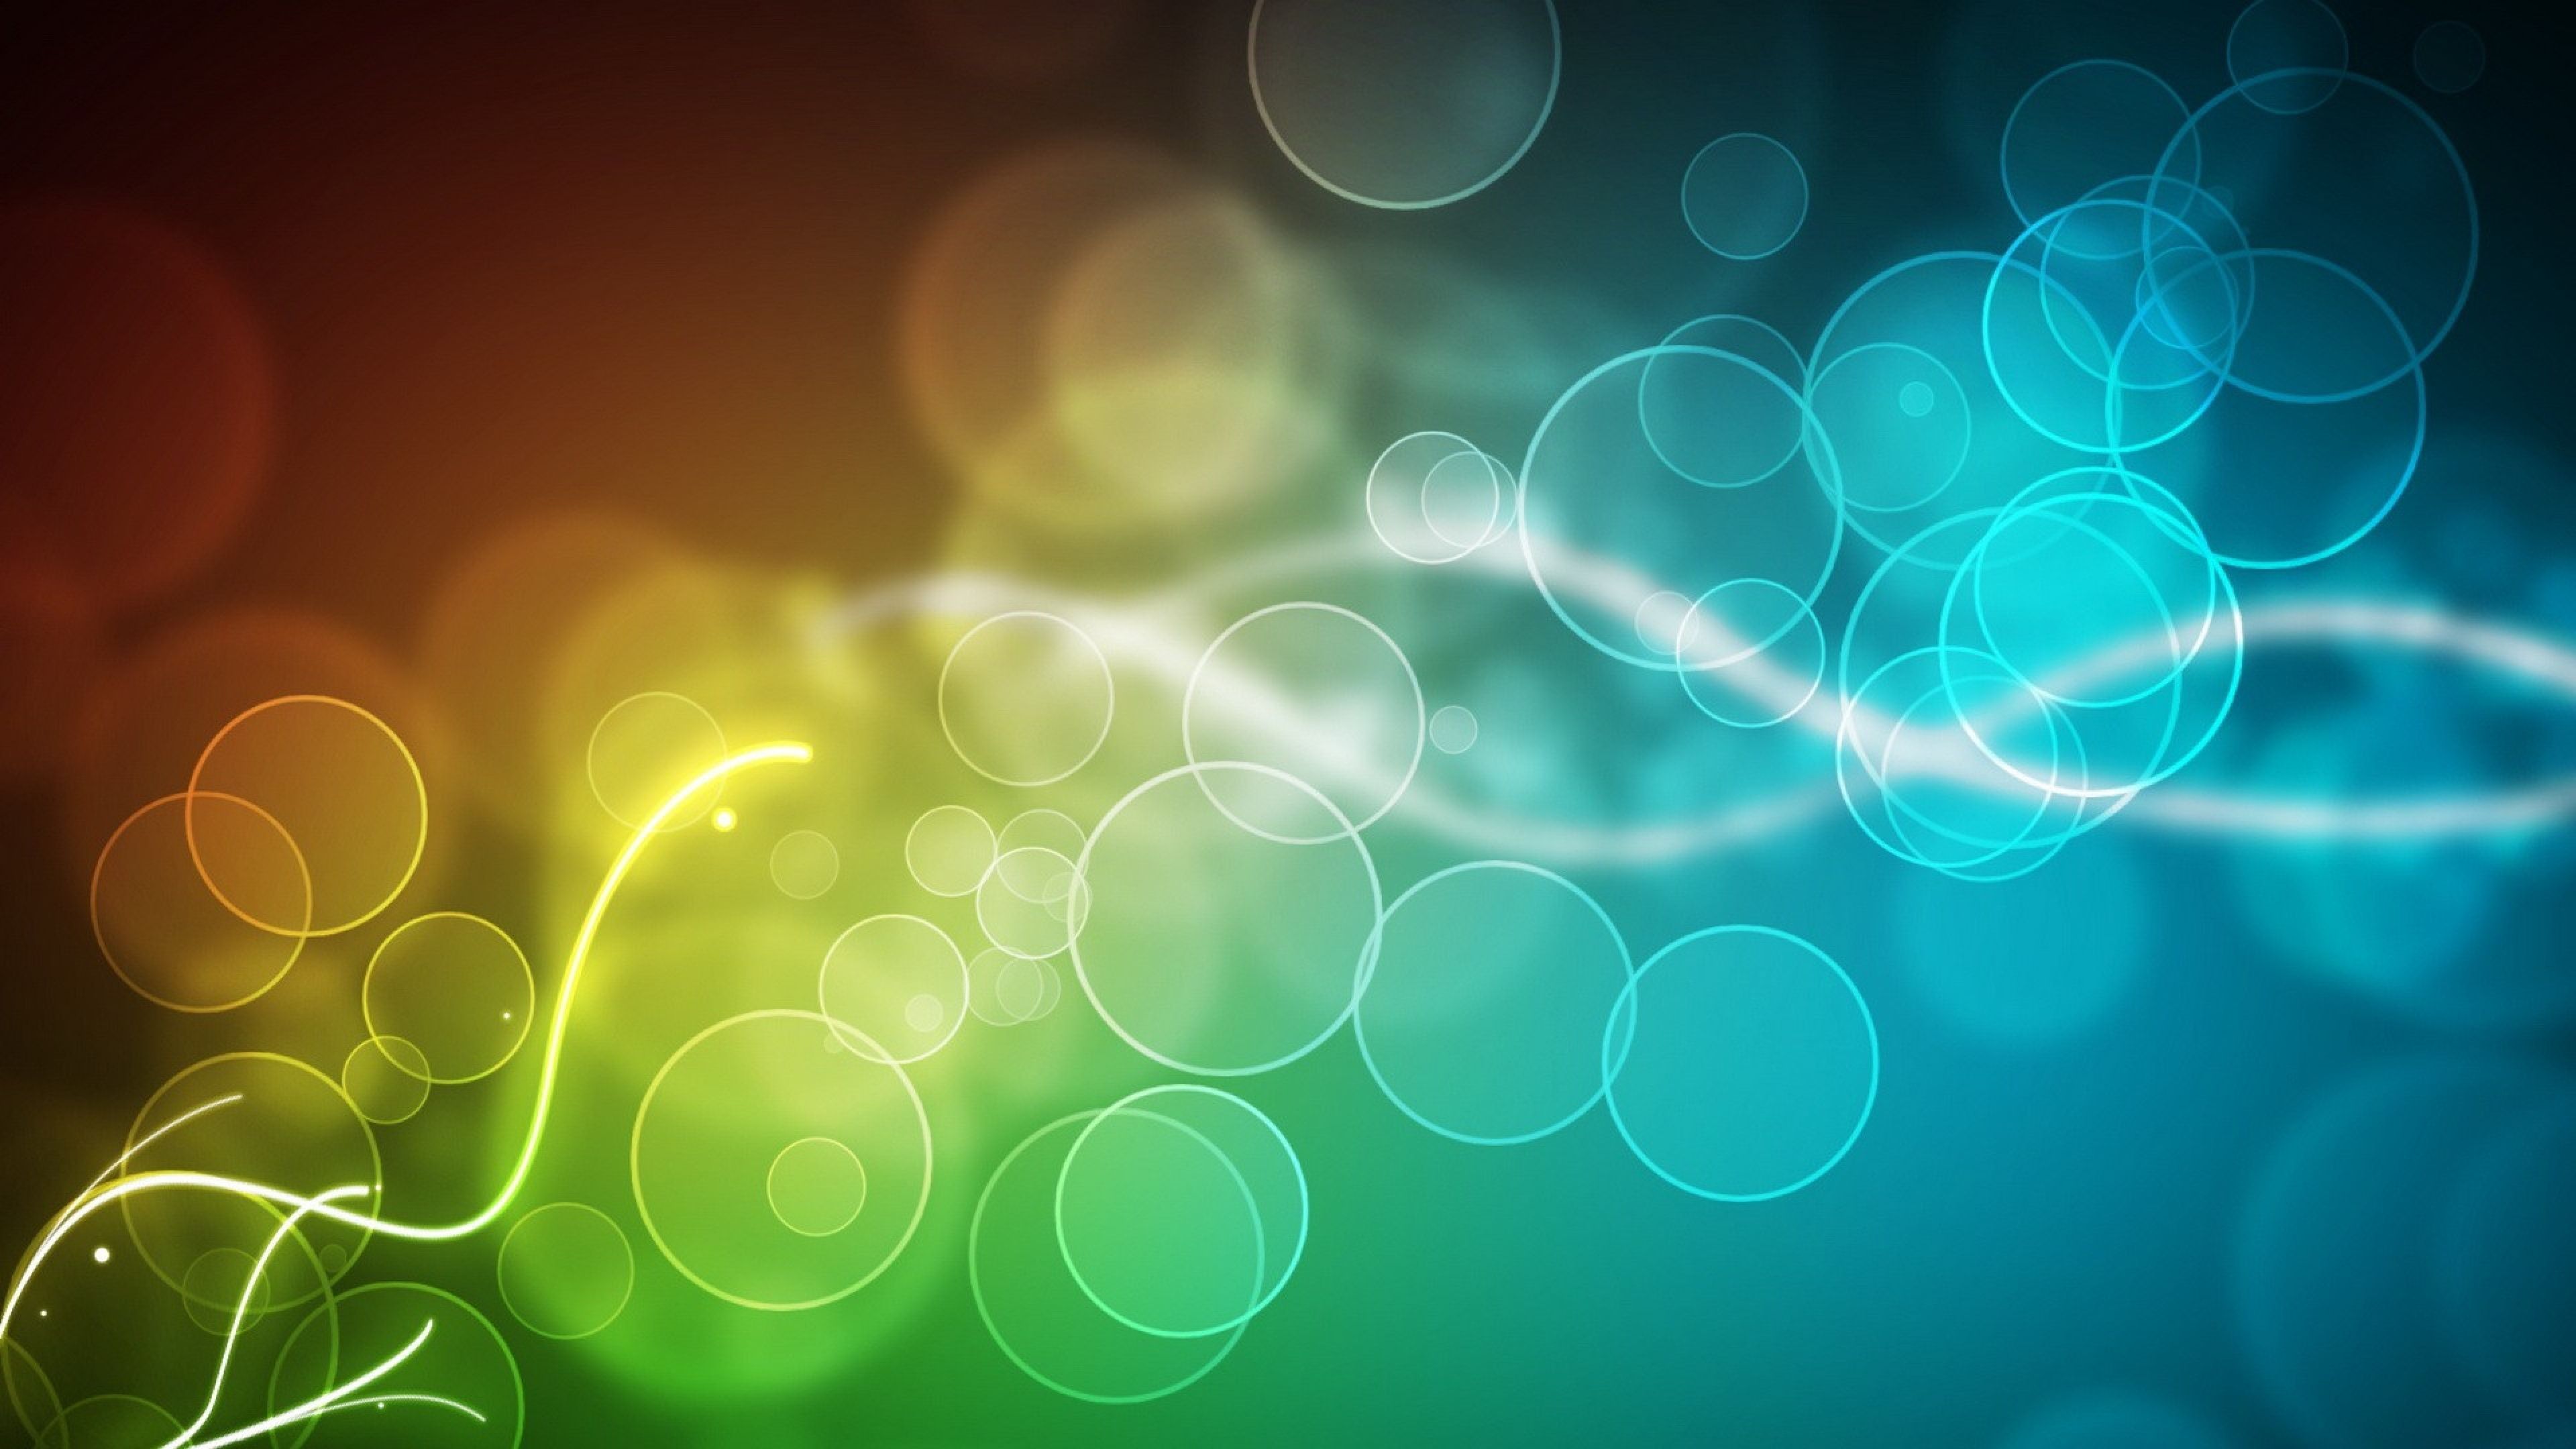 Download Wallpaper 3840x2160 Circles, Reflections, Multi-colored ...